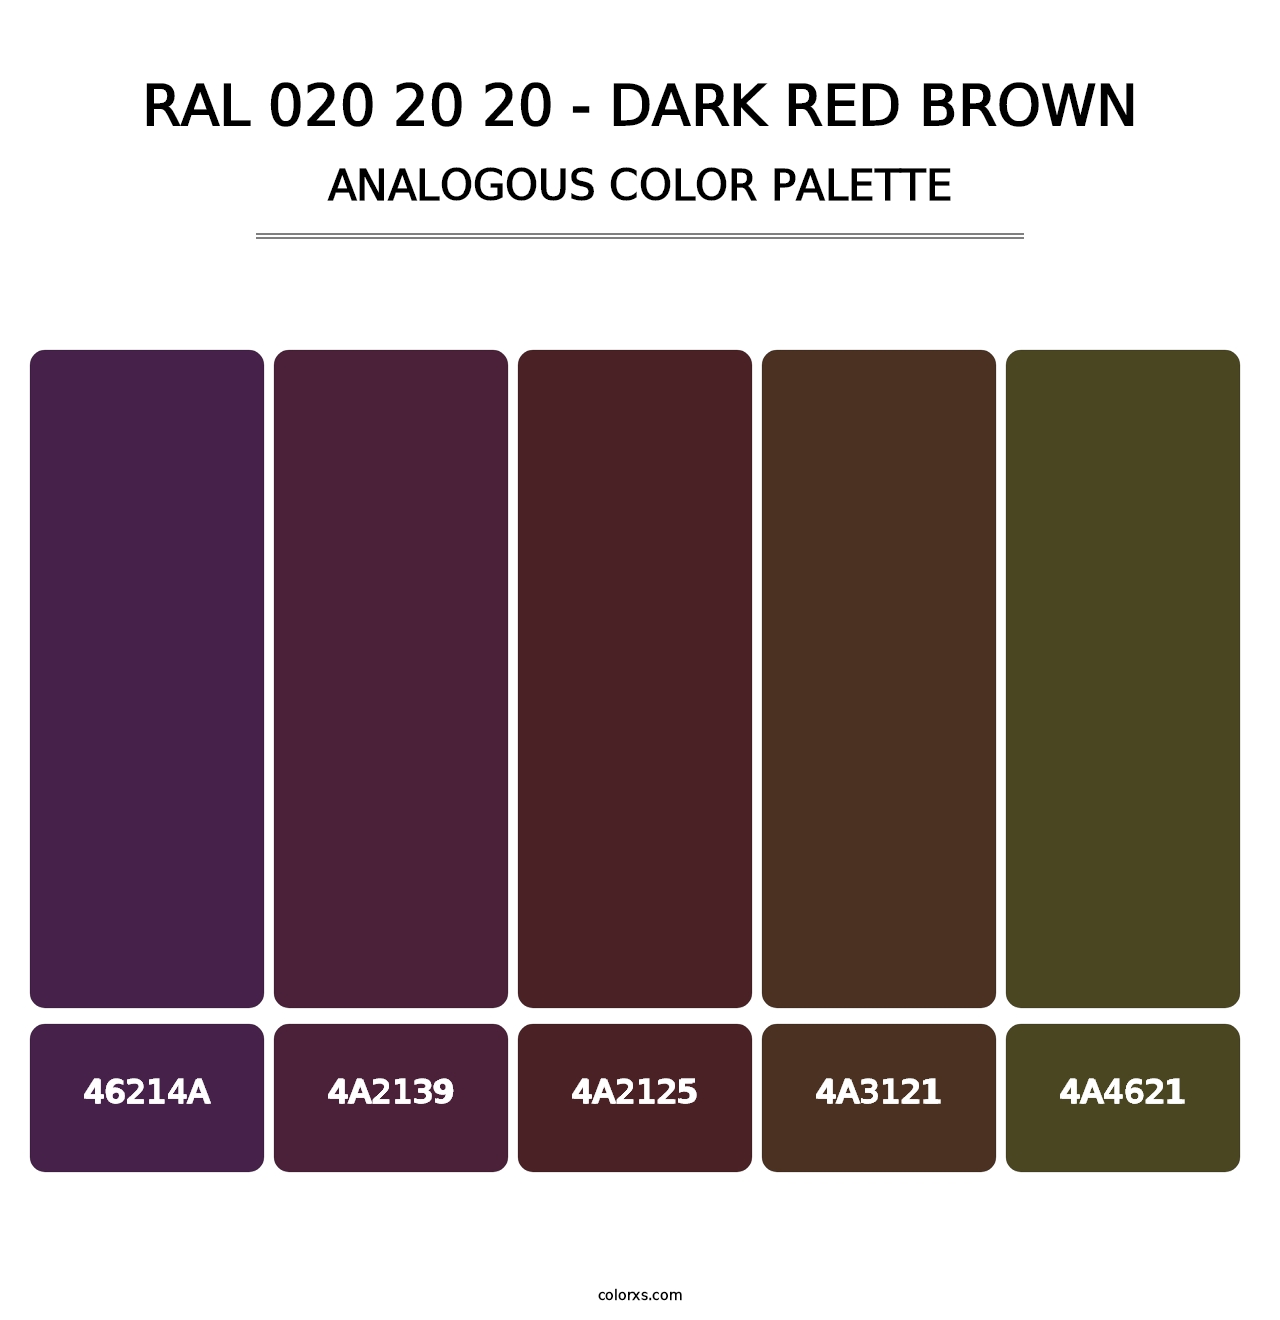 RAL 020 20 20 - Dark Red Brown - Analogous Color Palette